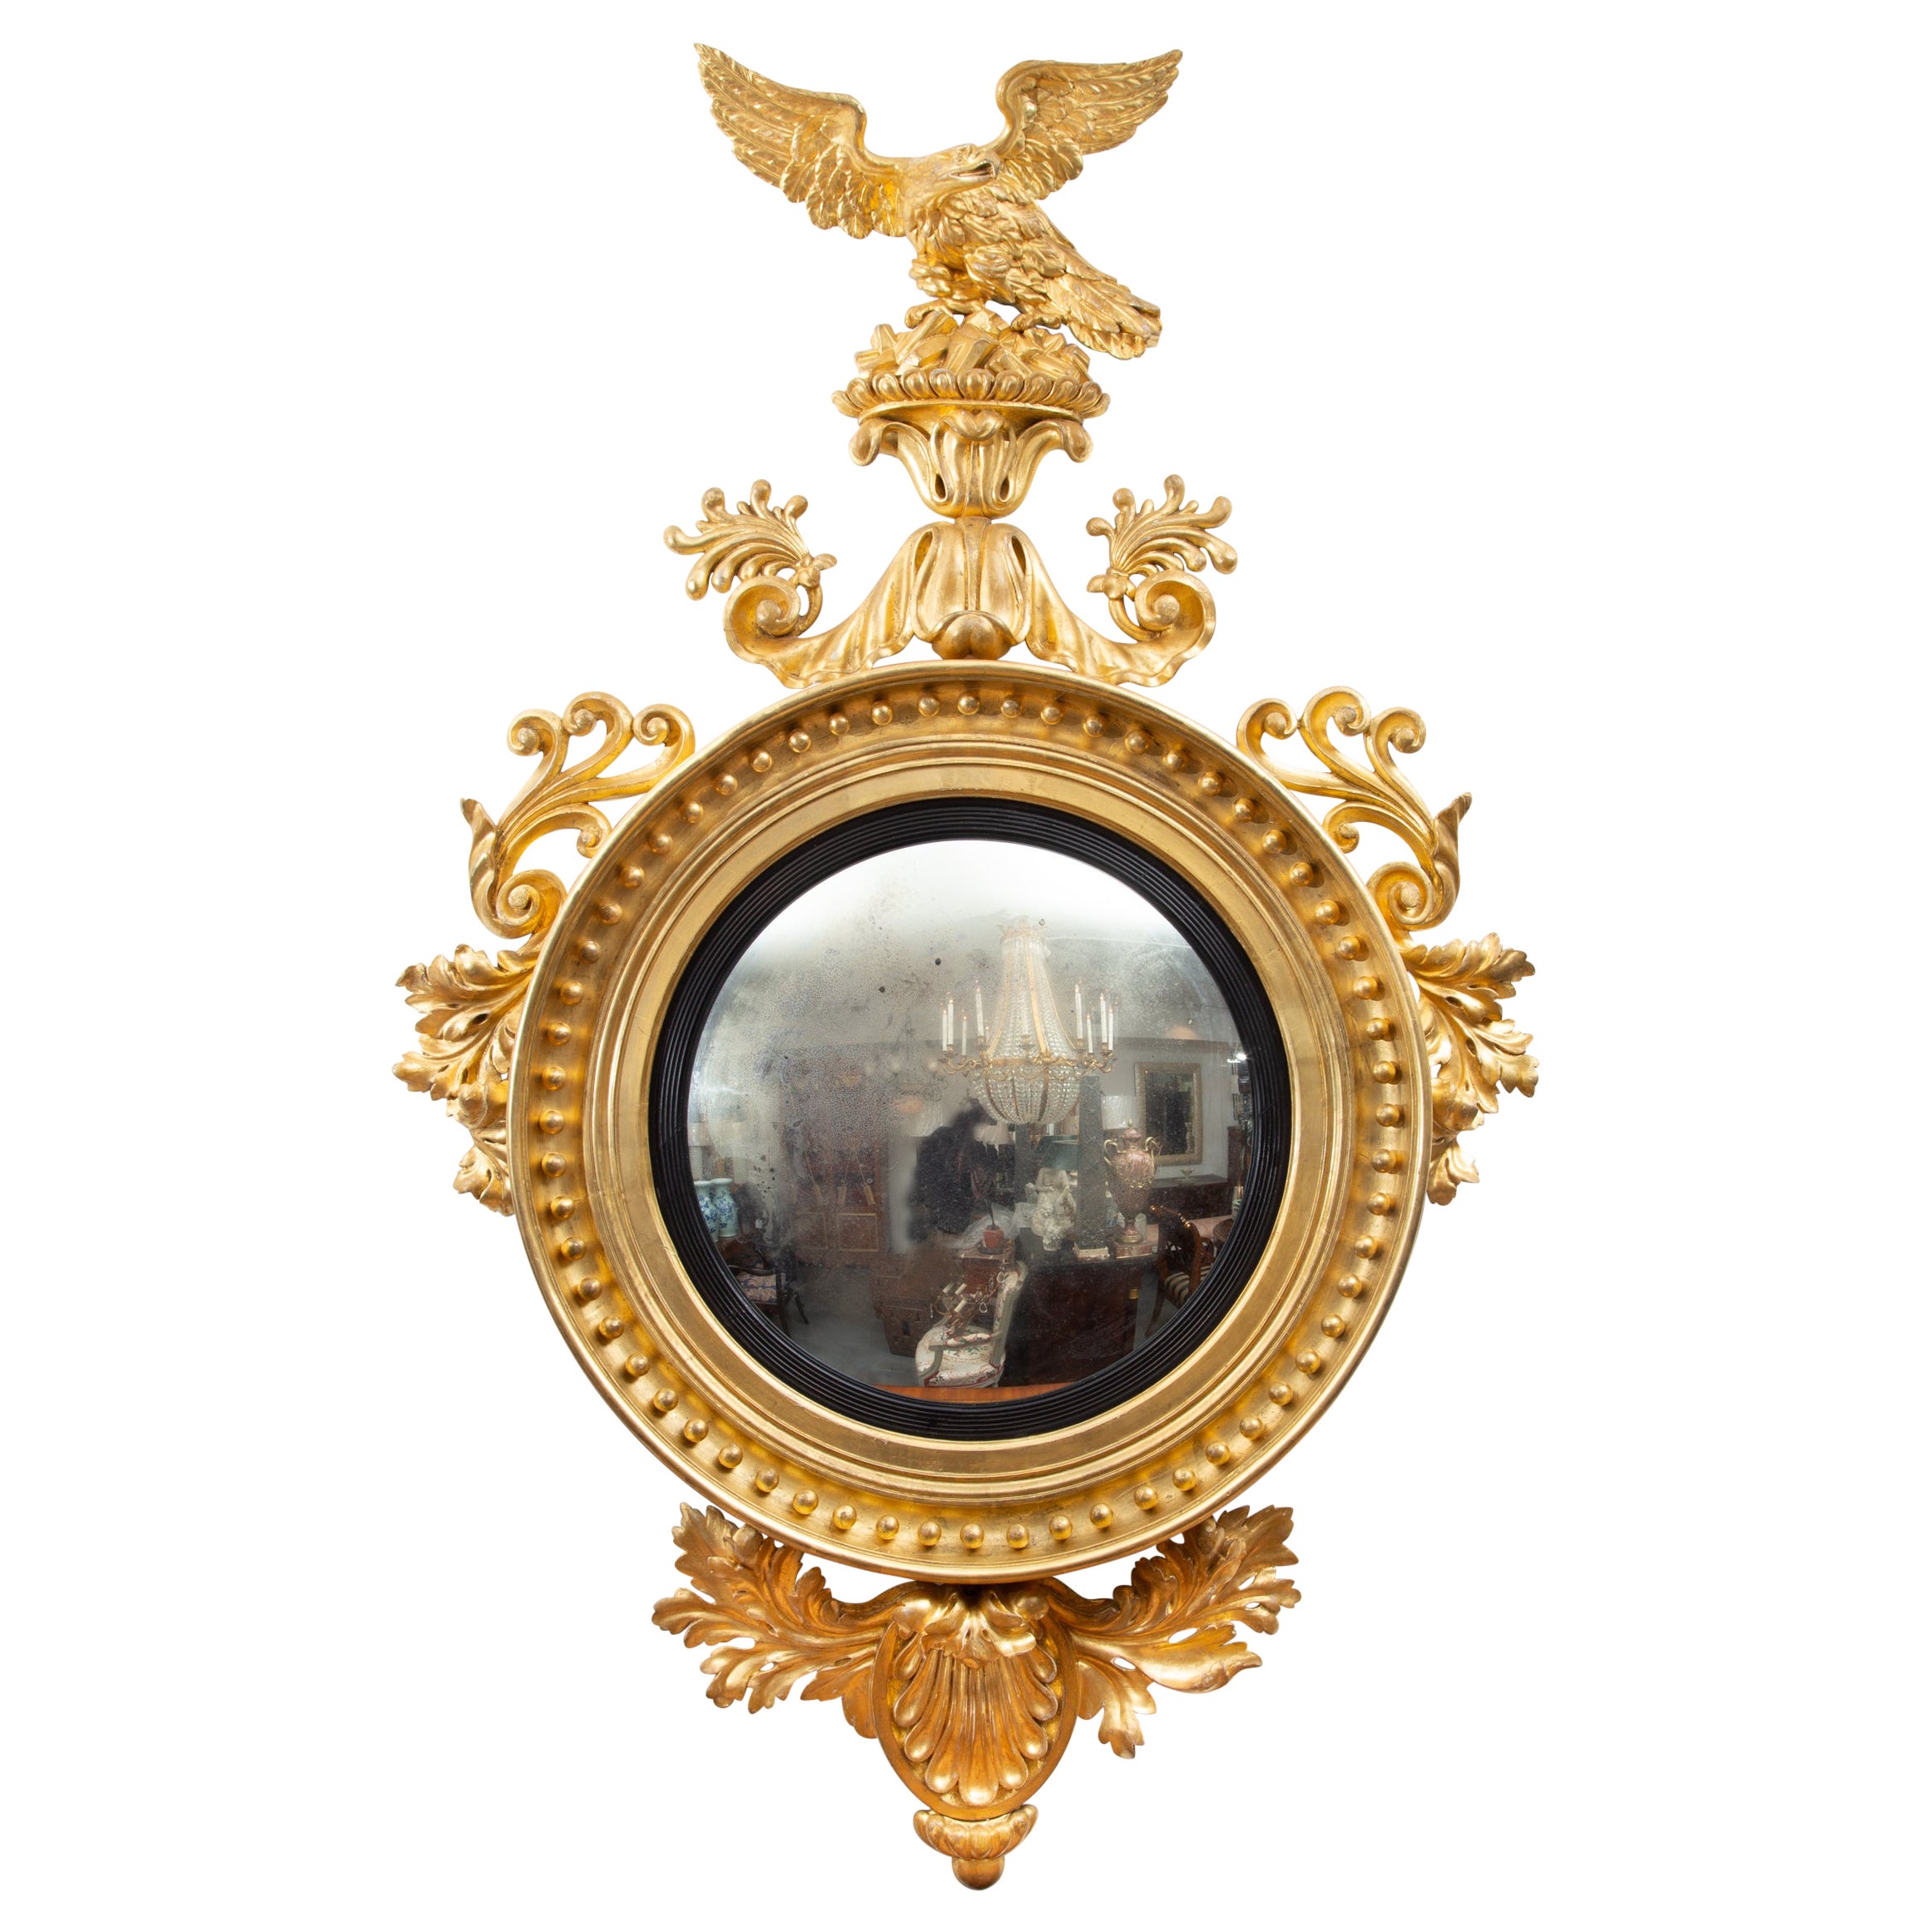 Continentinal Gilt Early 19th Century Wall Mirror For Sale